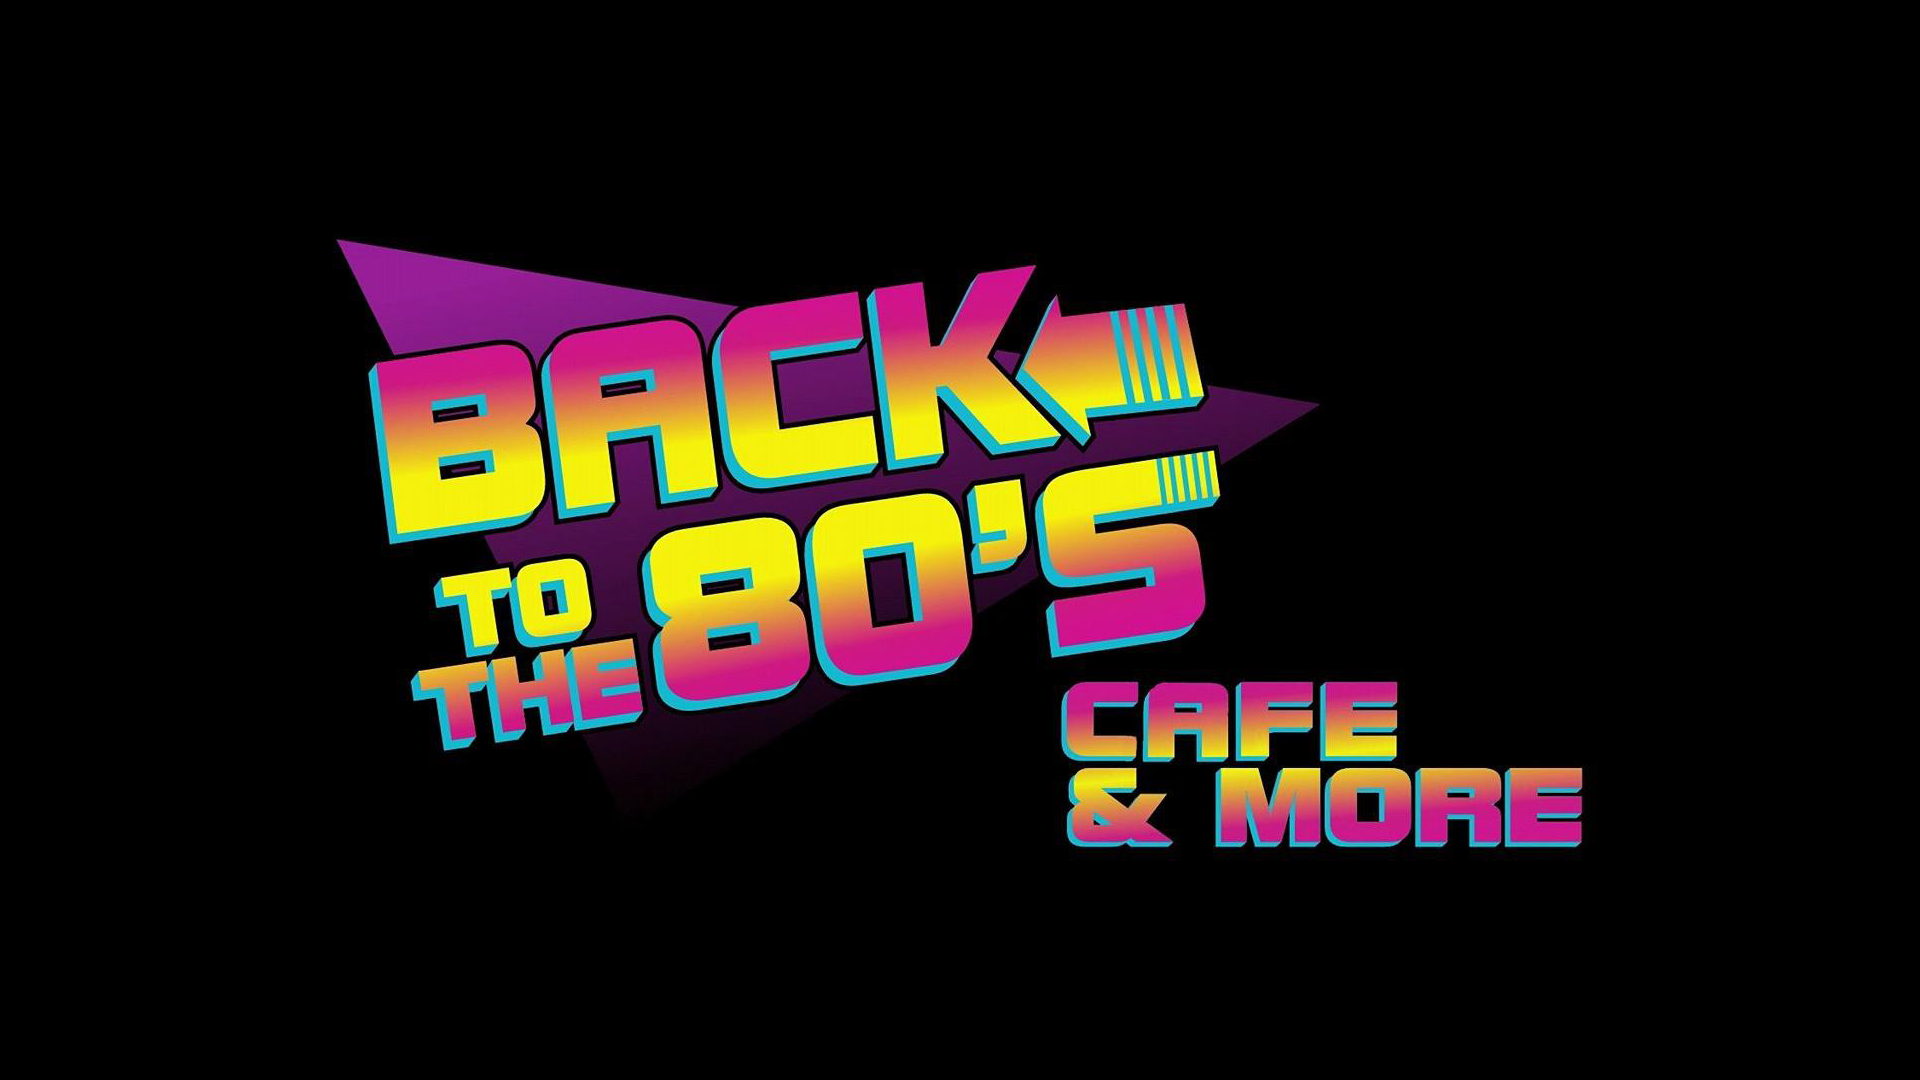 Nevada - Back to the 80's Cafe - One Night Qualifier